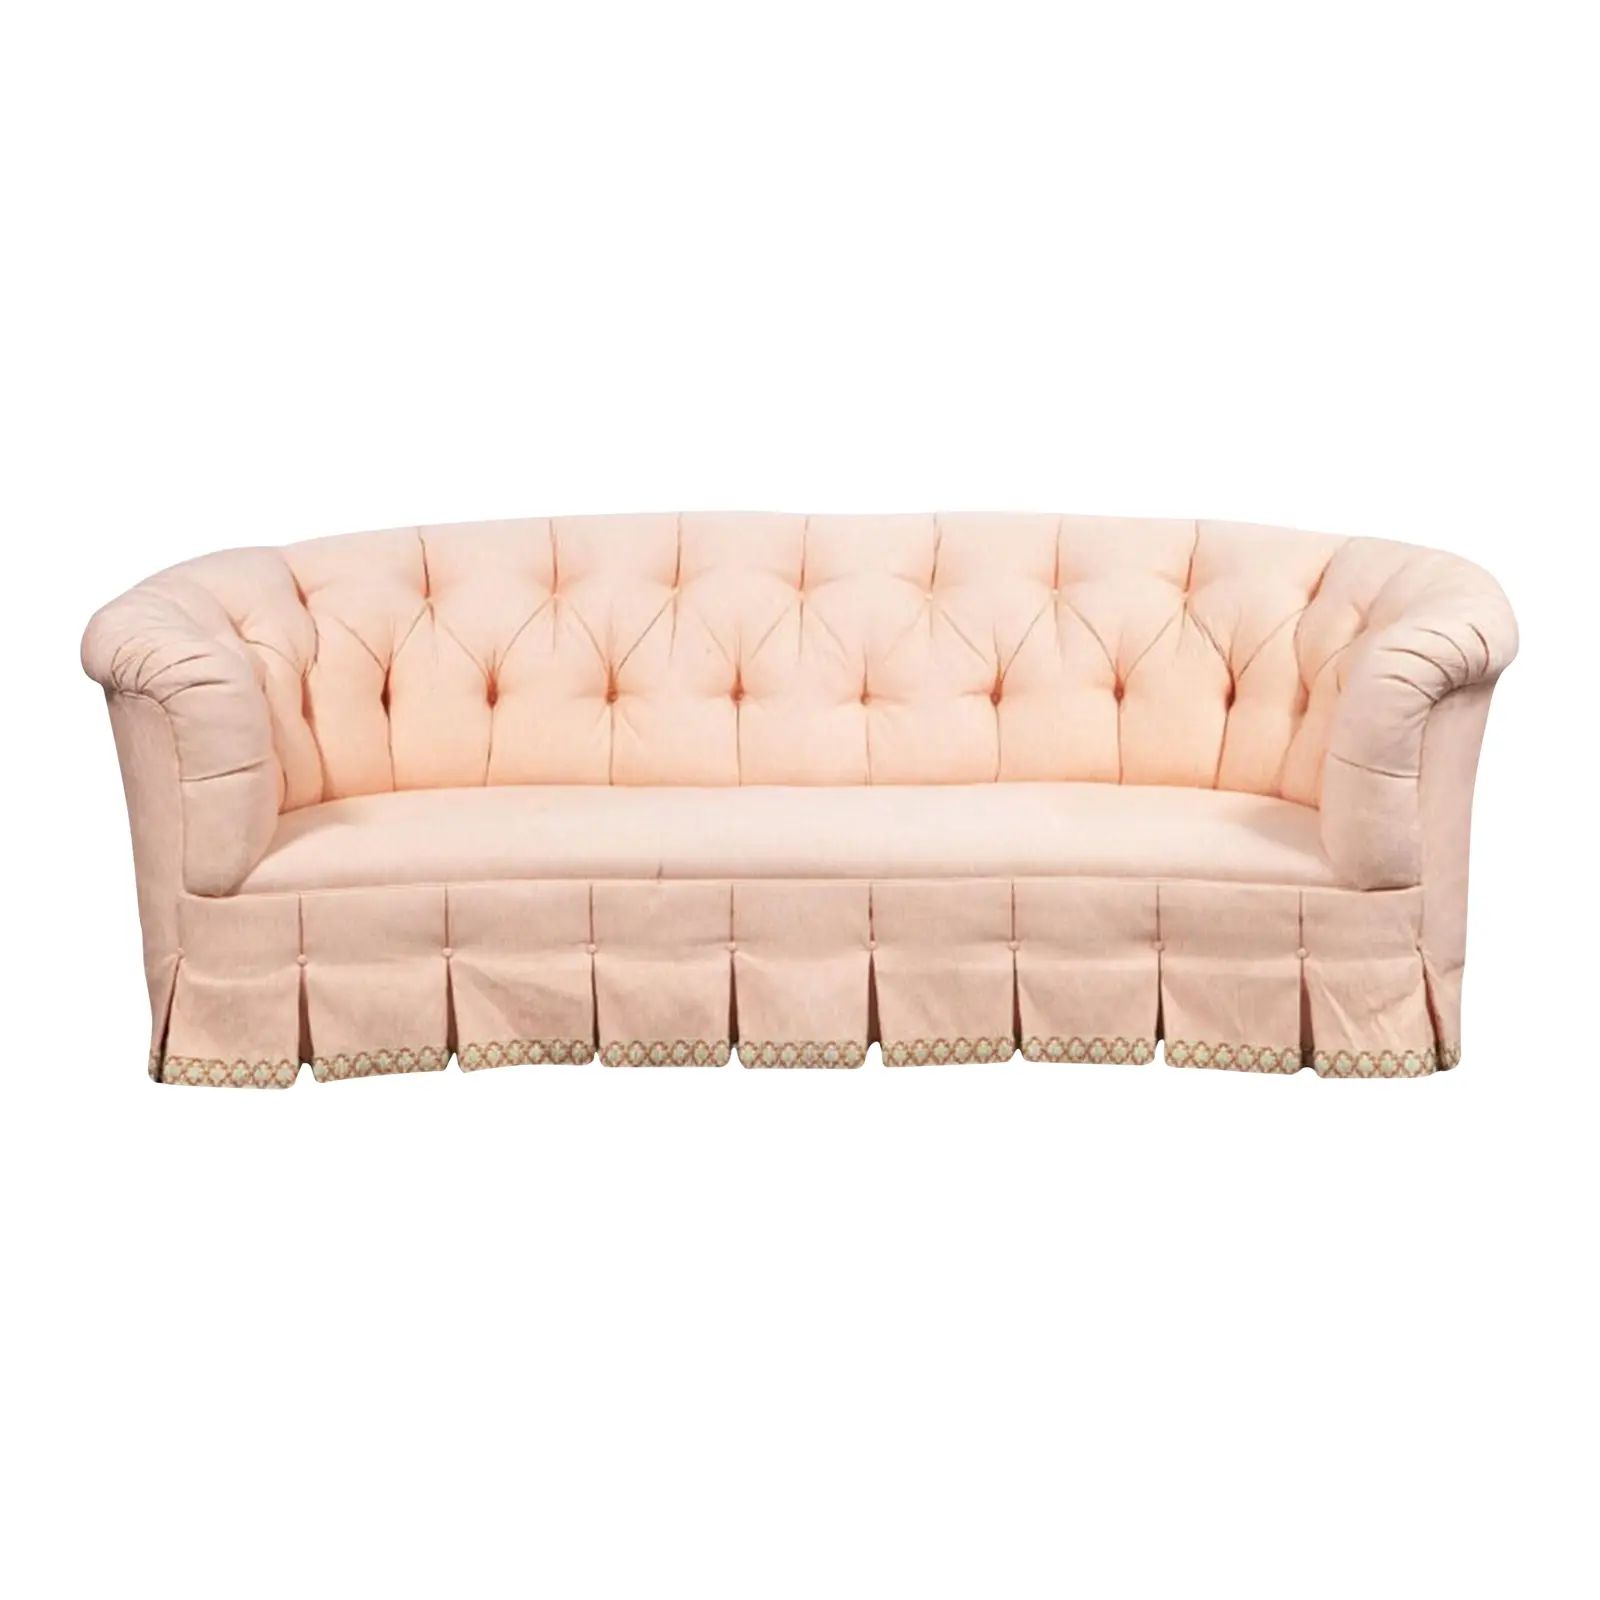 Pale Pink Button Tufted Upholstered Sofa With Pleated Skirt | Chairish